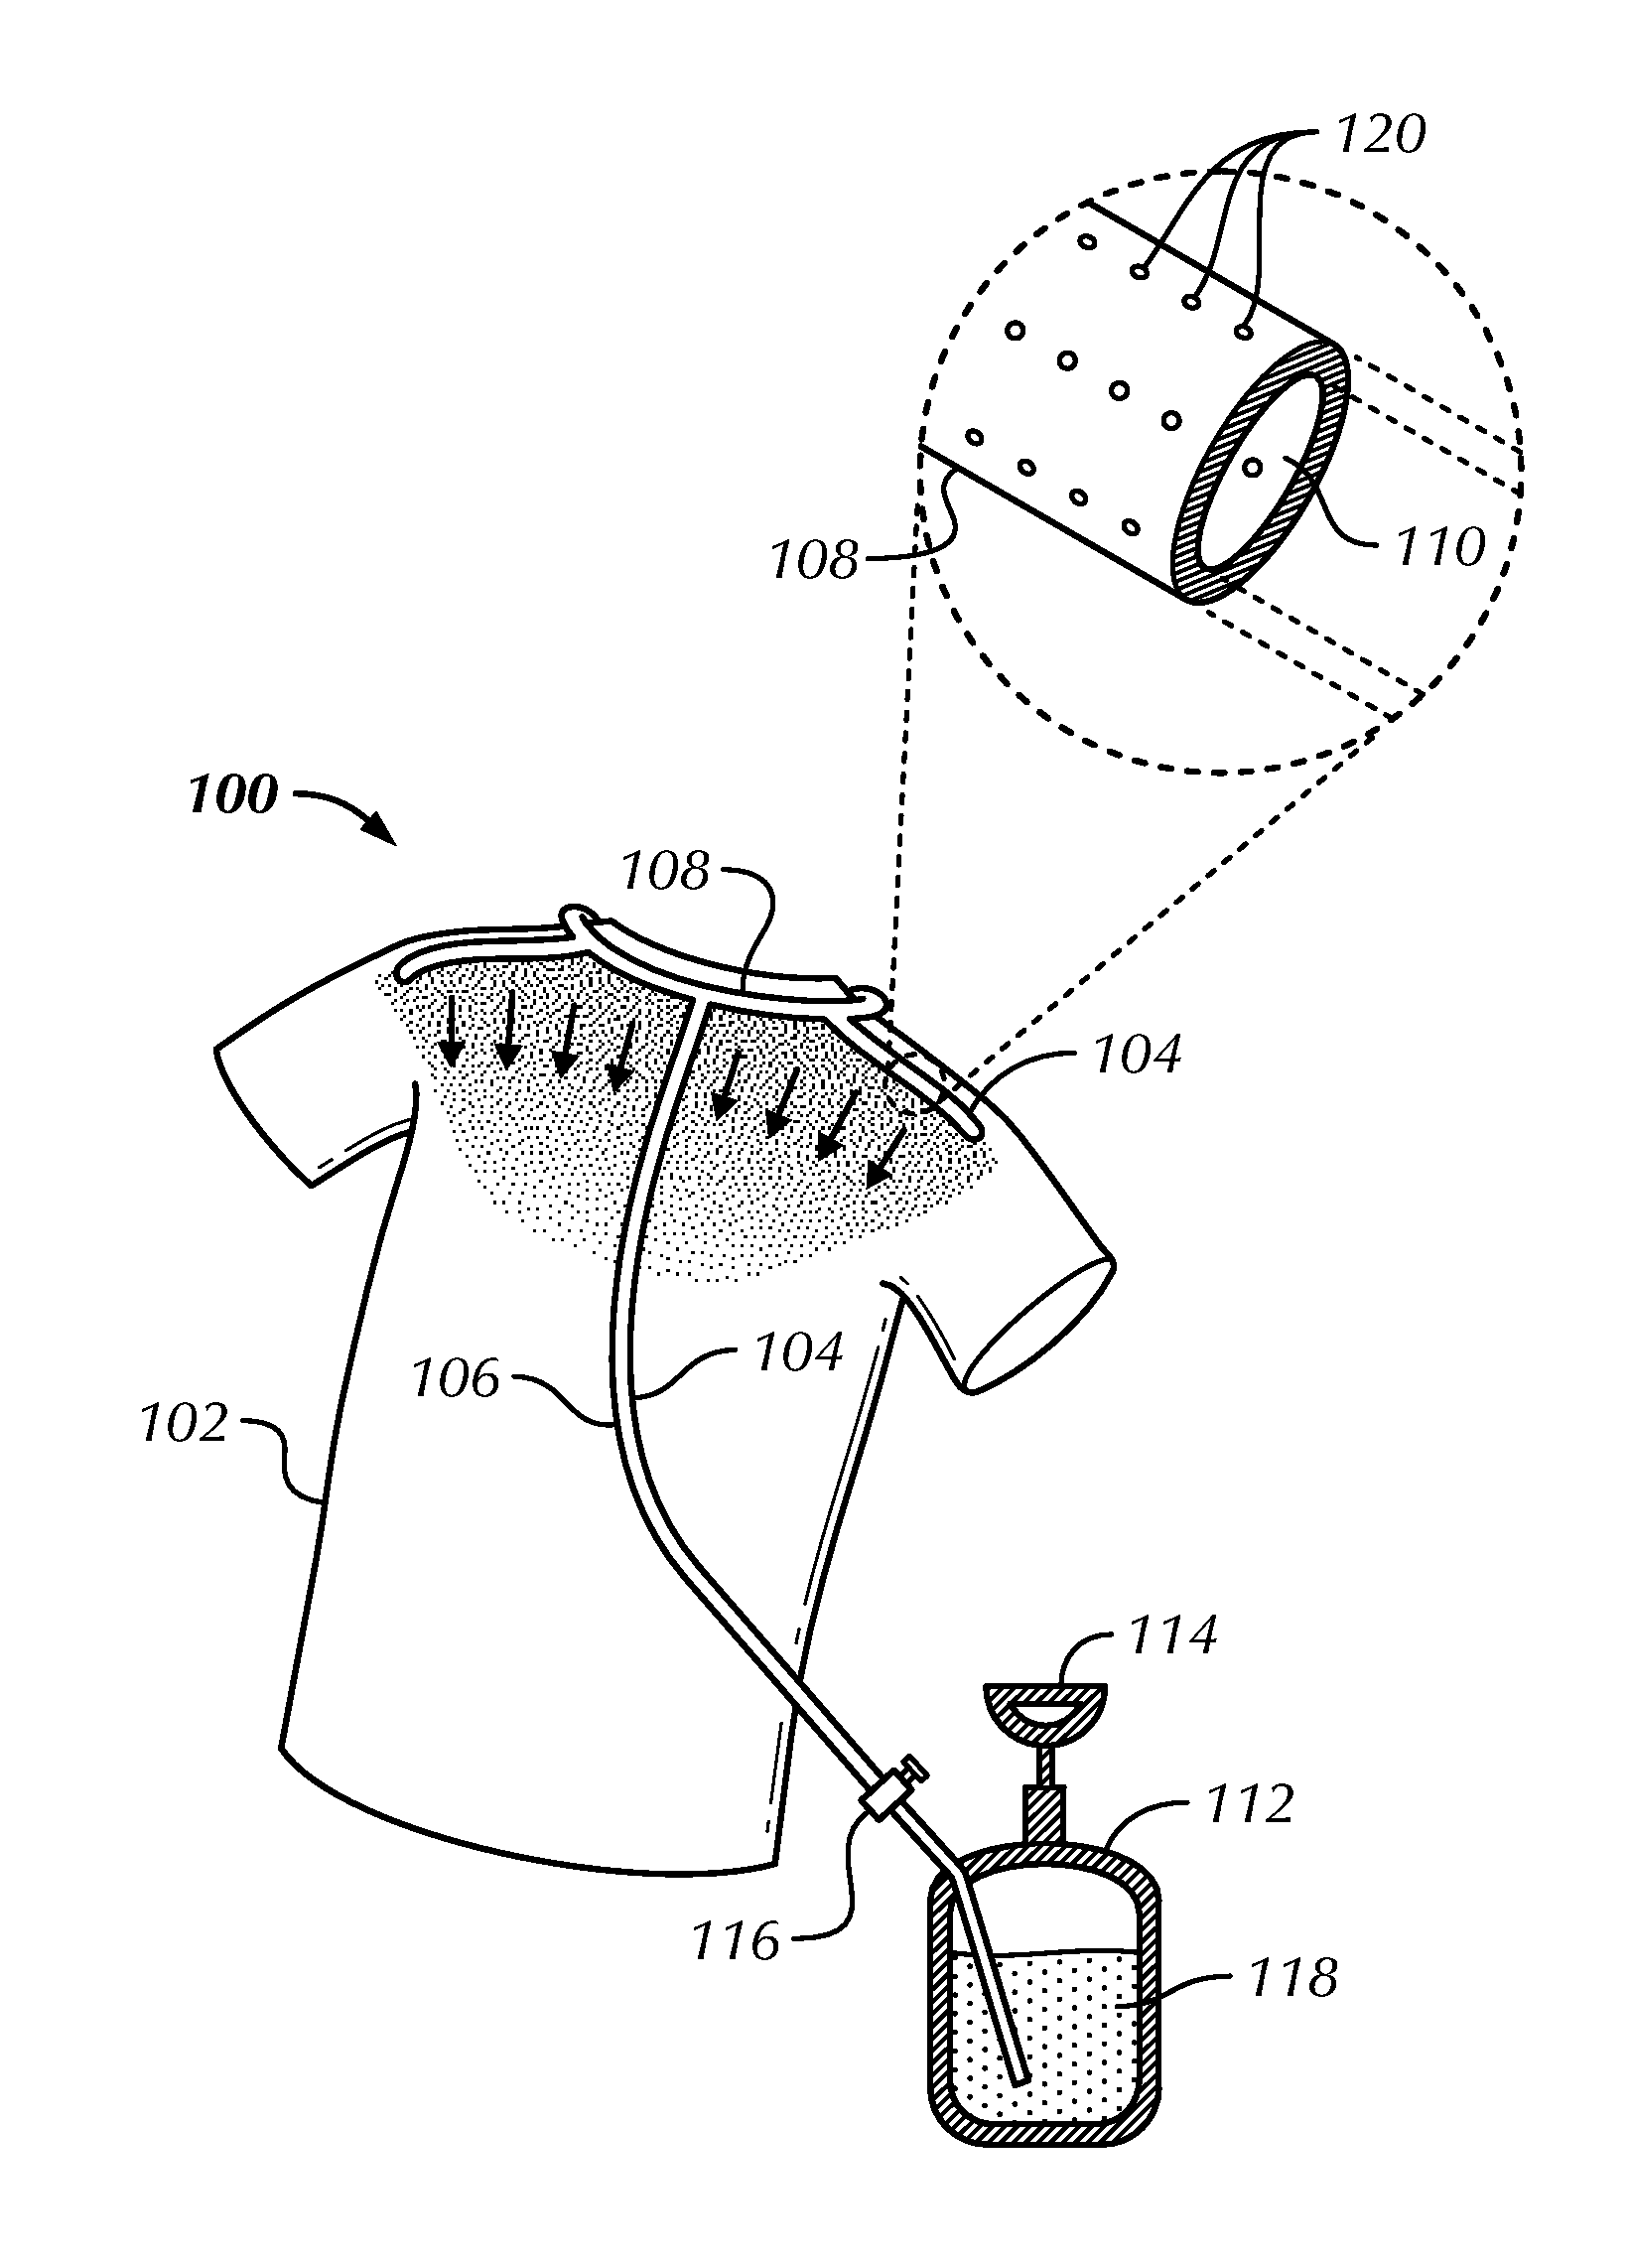 Evaporative cooling clothing system for reducing body temperature of a wearer of the clothing system